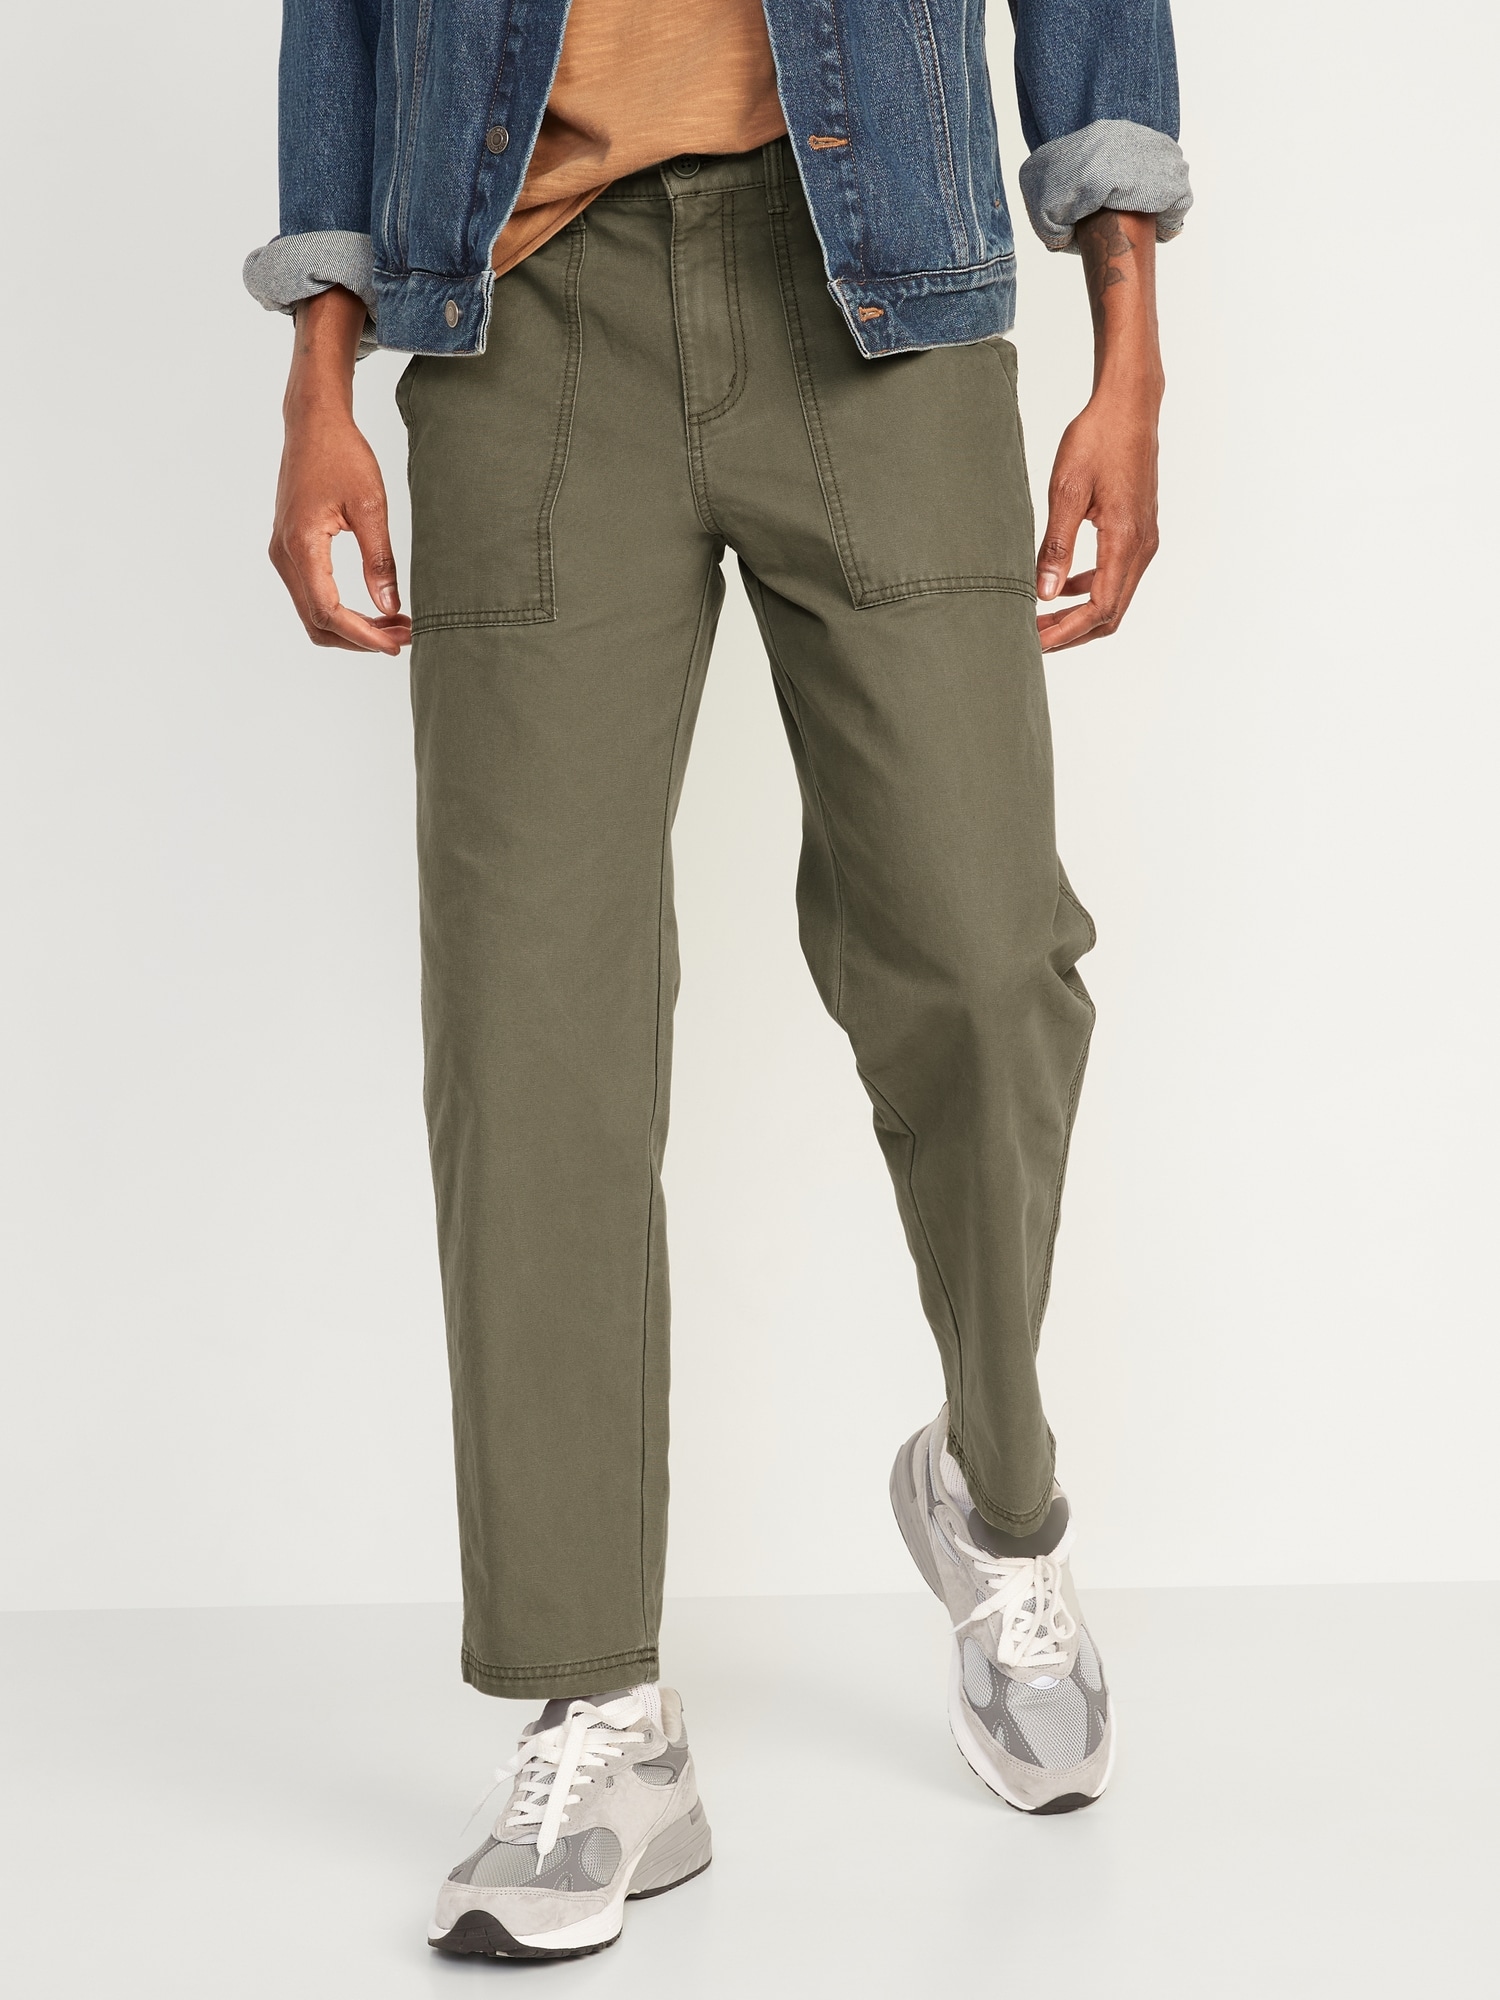 Loose Taper Non-Stretch Canvas Workwear Pants